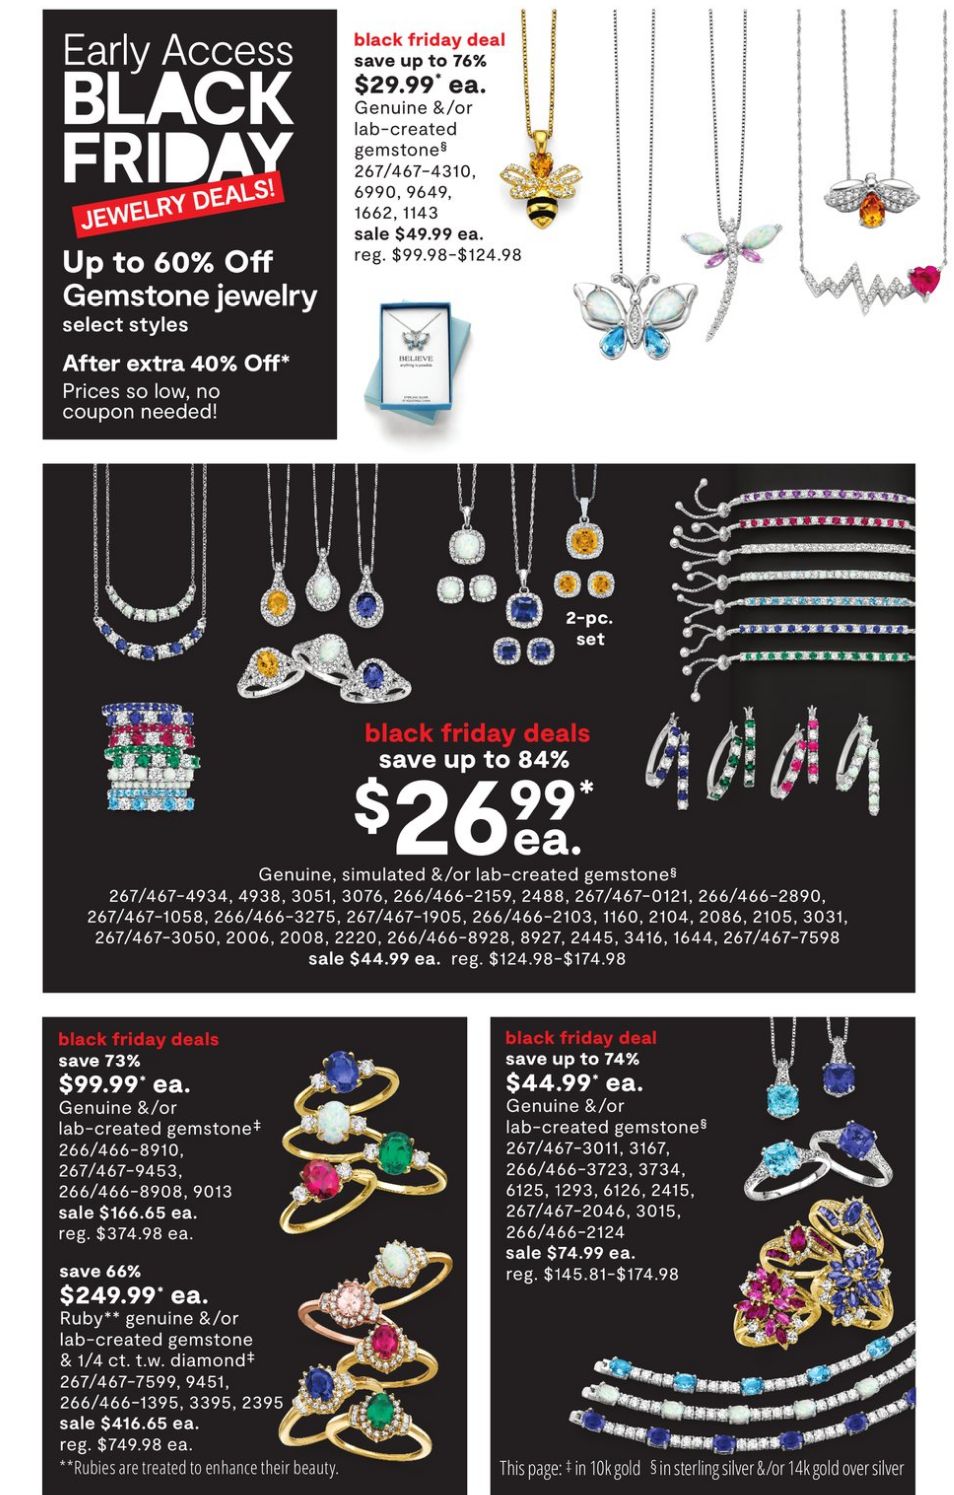 Weekly ad JC Penney 10/27/2022 - 11/10/2022